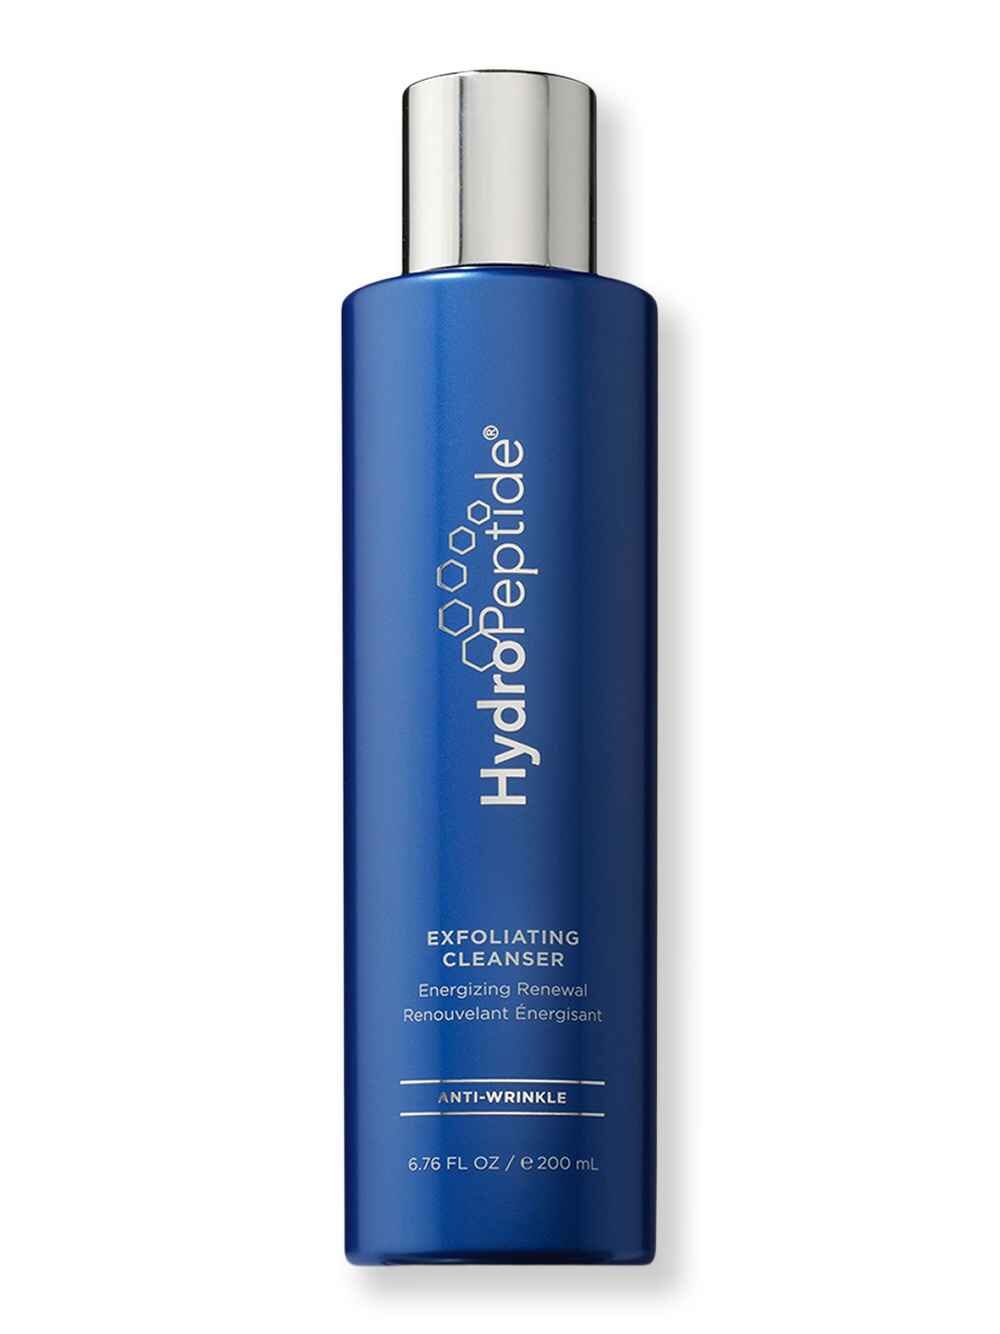 Hydropeptide Hydropeptide Exfoliating Cleanser 6.76 oz200 ml Face Cleansers 